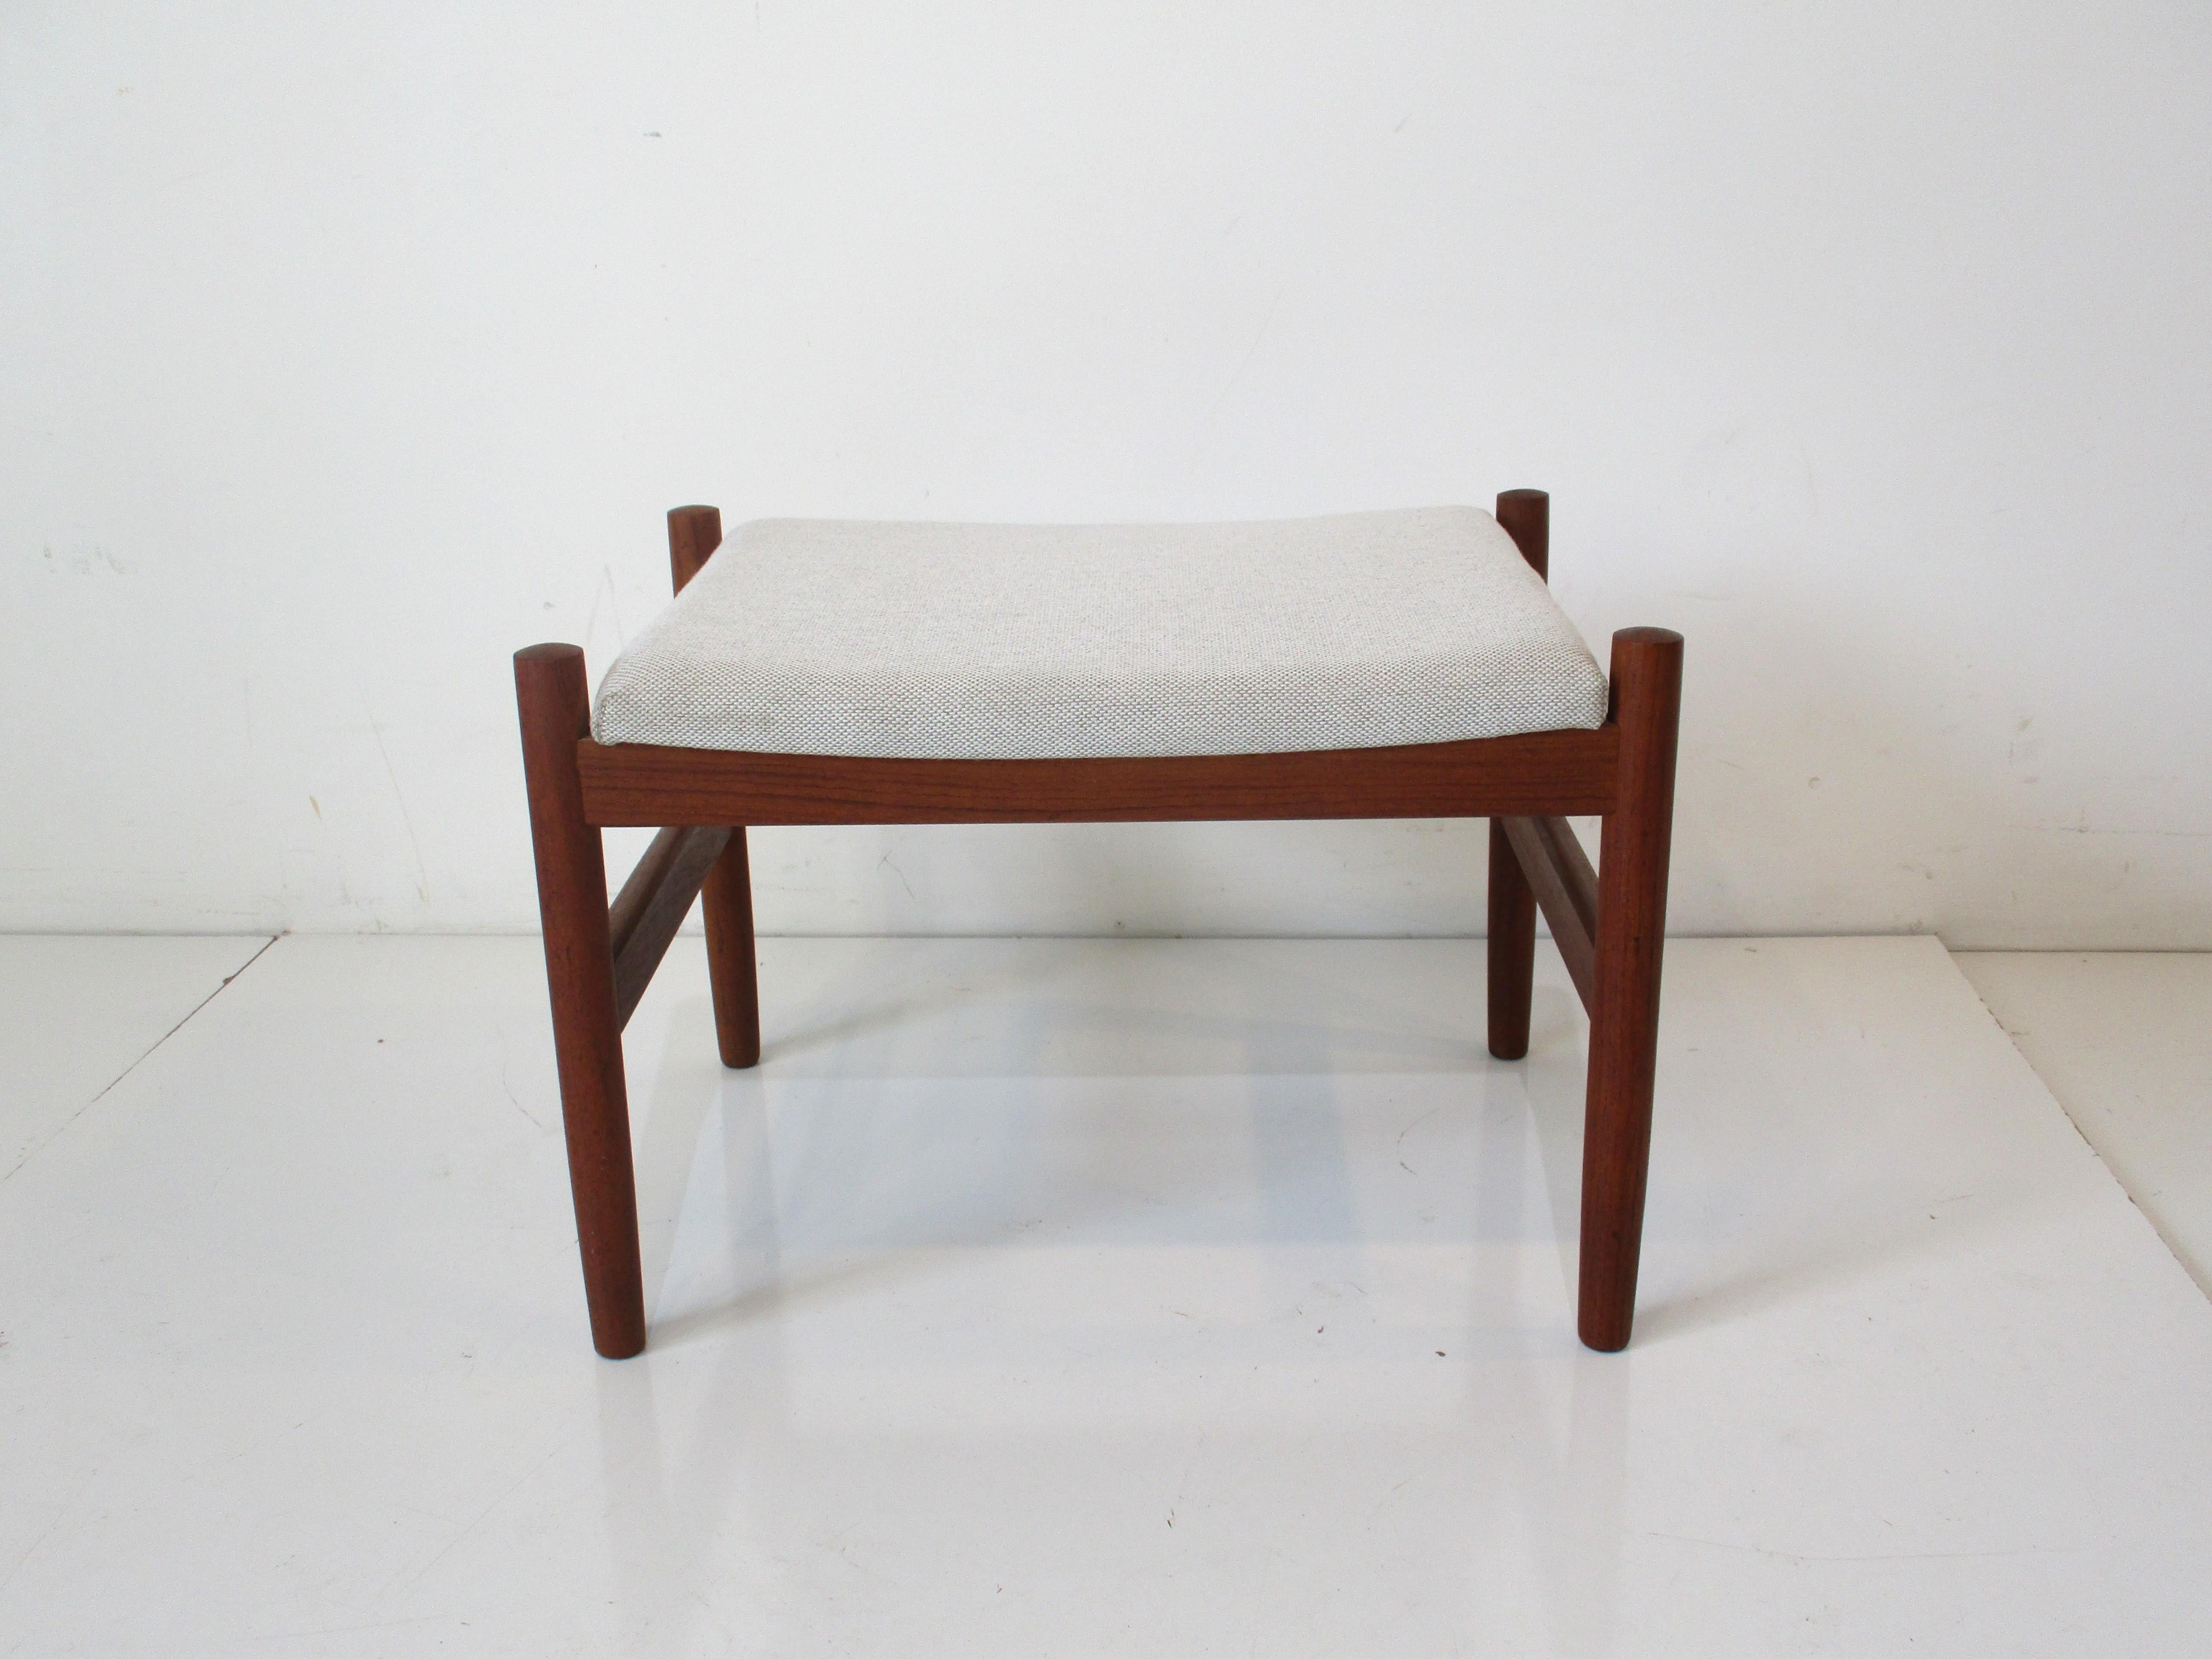 A smaller sized teak wood framed ottoman or stool with an upholstered cushion designed by Hugo Frandsen for Spottrup Mobler Denmark. Great piece to acompany a lounge chair or just used as a stool.